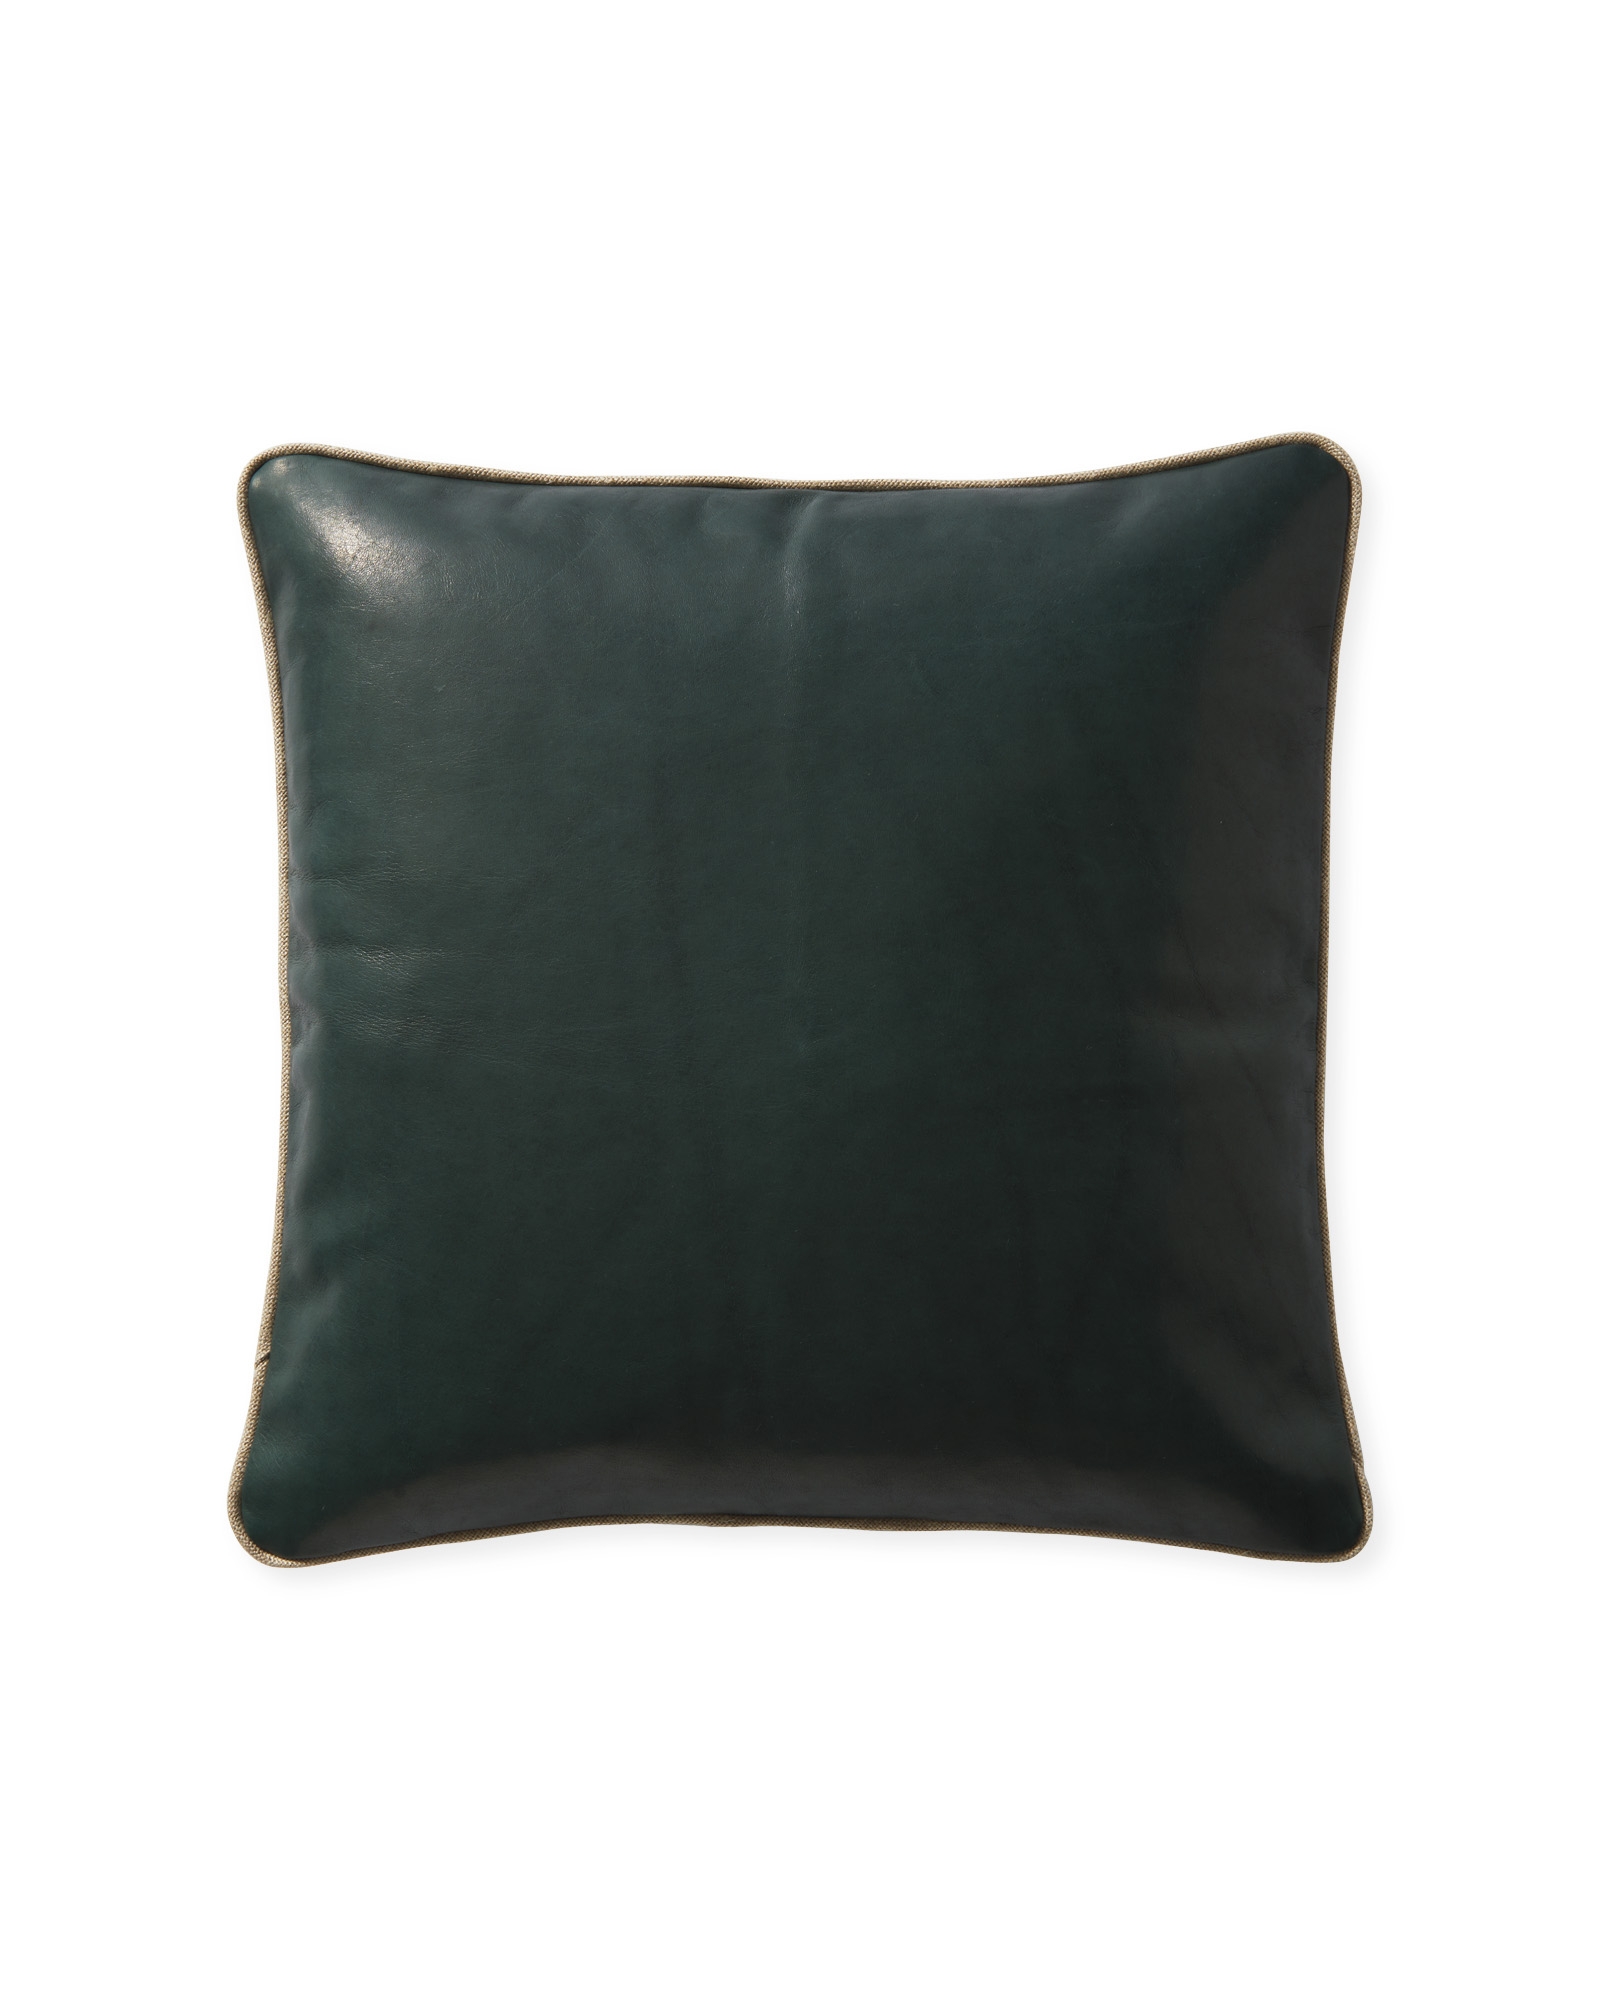 Leather 20" SQ Pillow Cover - Evergreen - Insert sold separately - Image 0